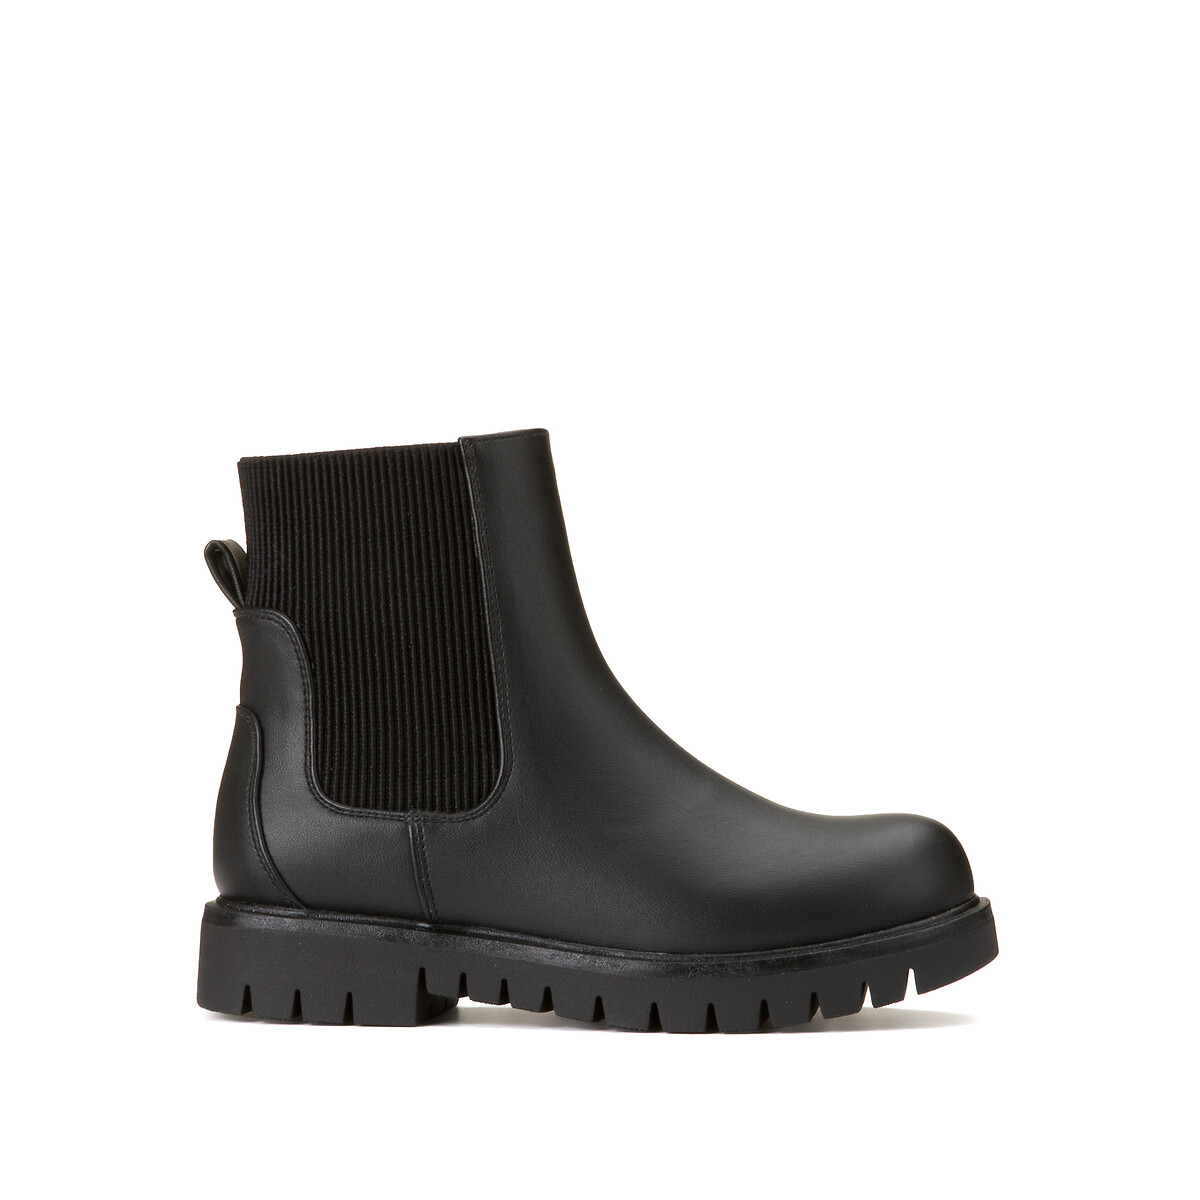 Kids high chelsea boots with zip fastening, black, La Redoute ...